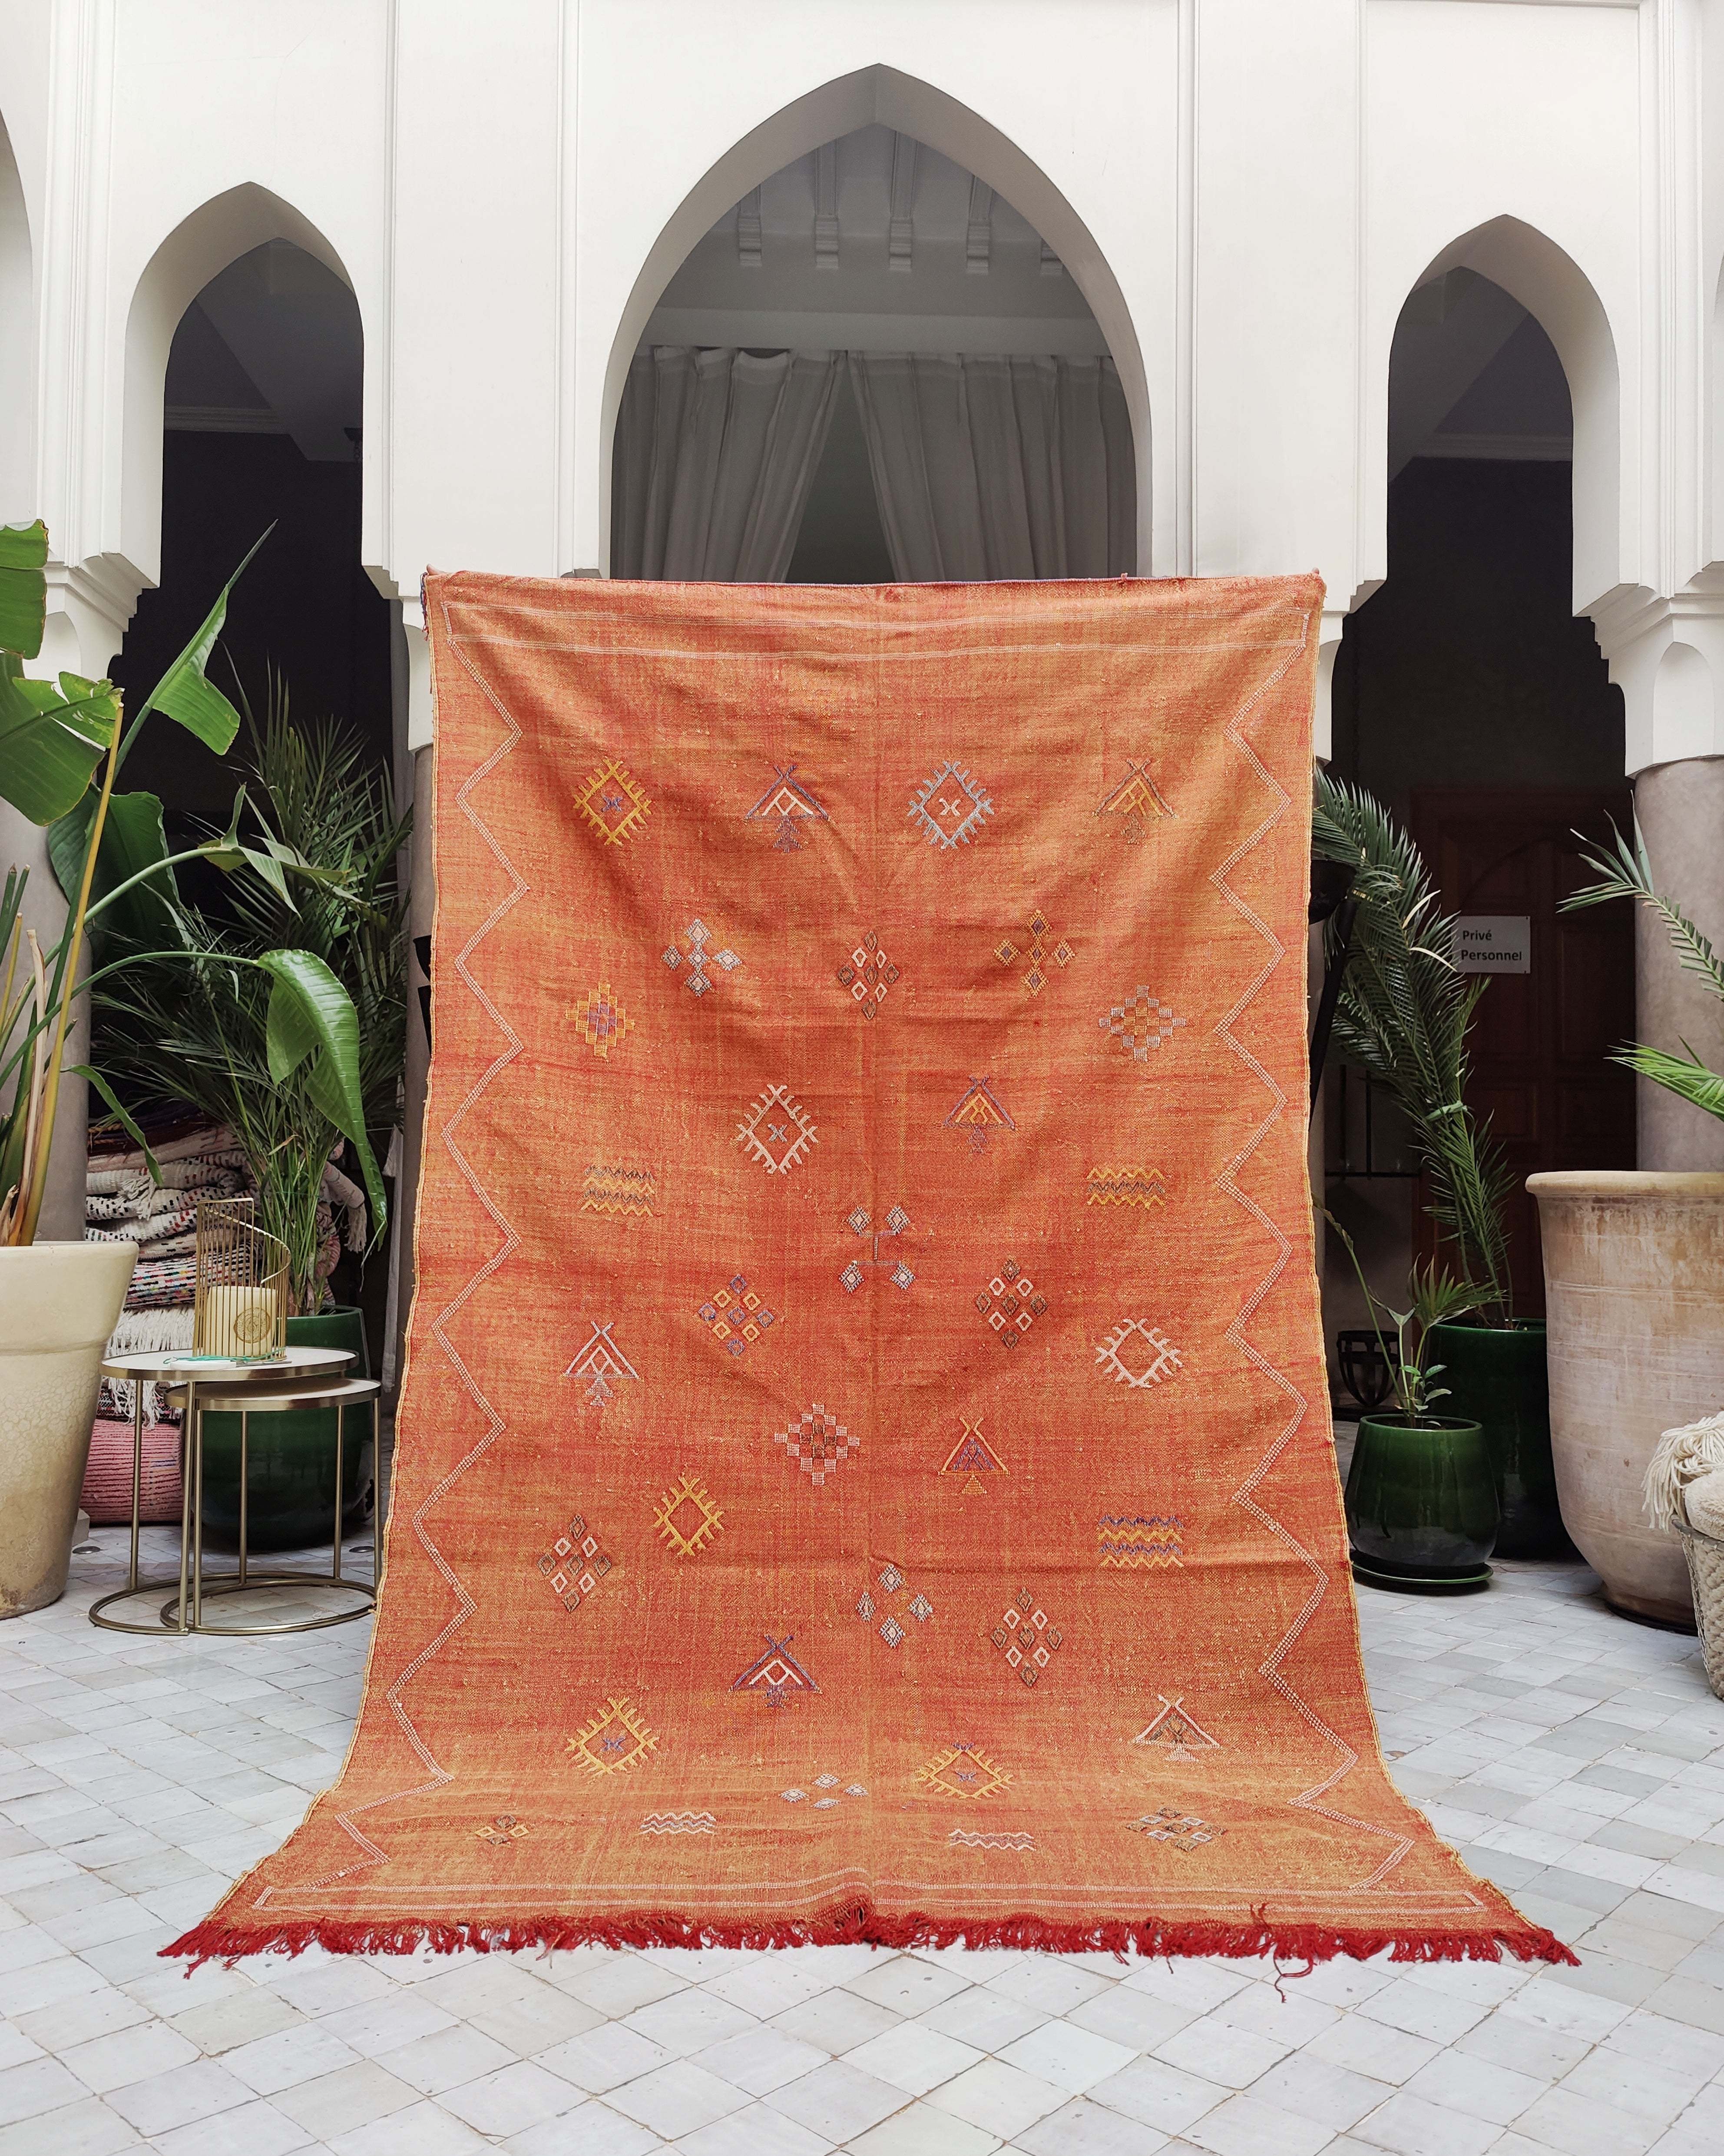 Rusty Red SABRA Berber Kilim Rug from Morocco with Embroidery 